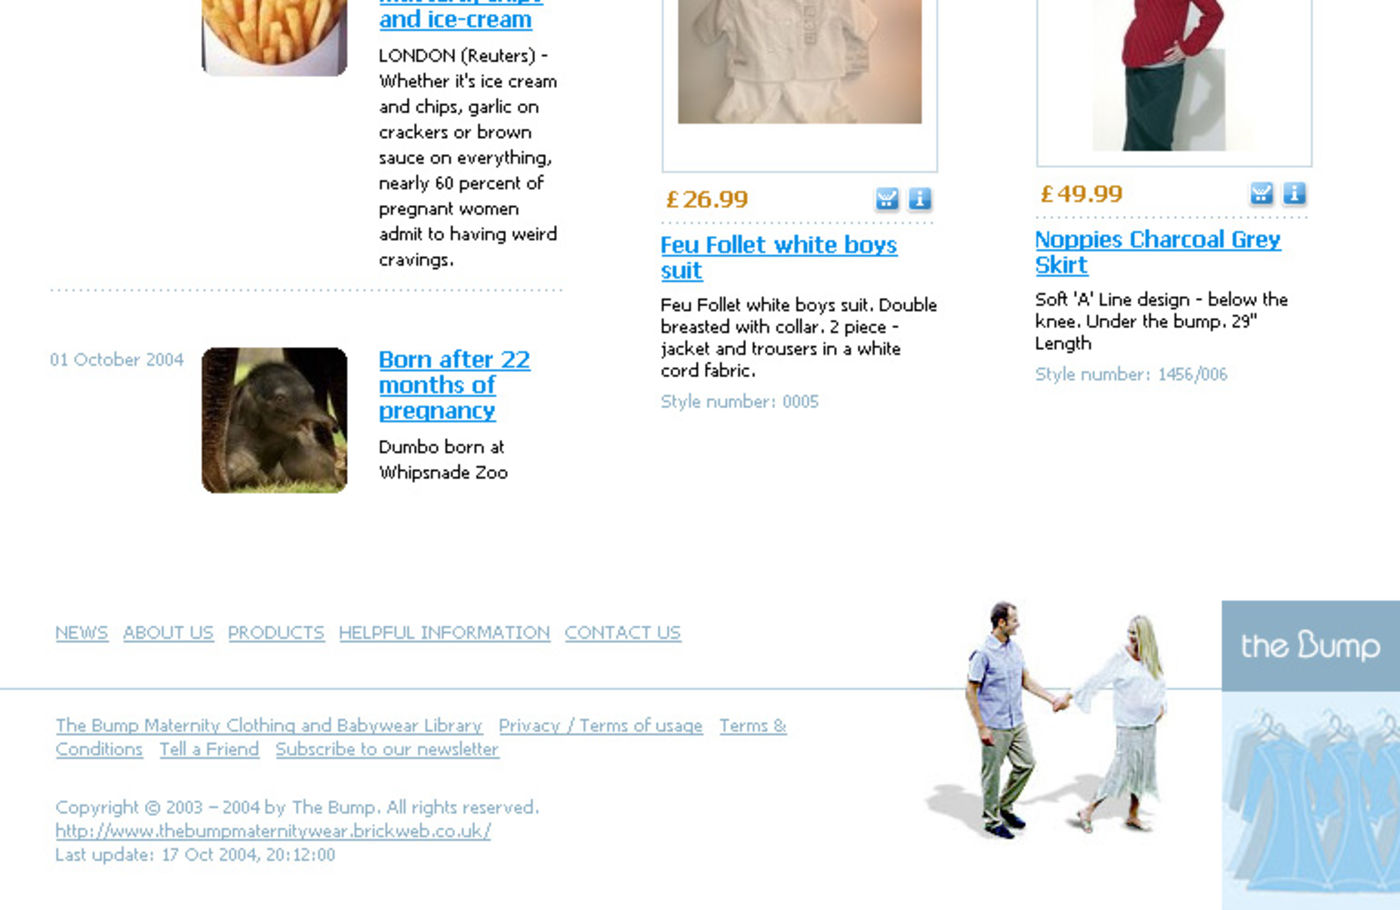 The Bump Maternity Clothing & Babywear Homepage footer